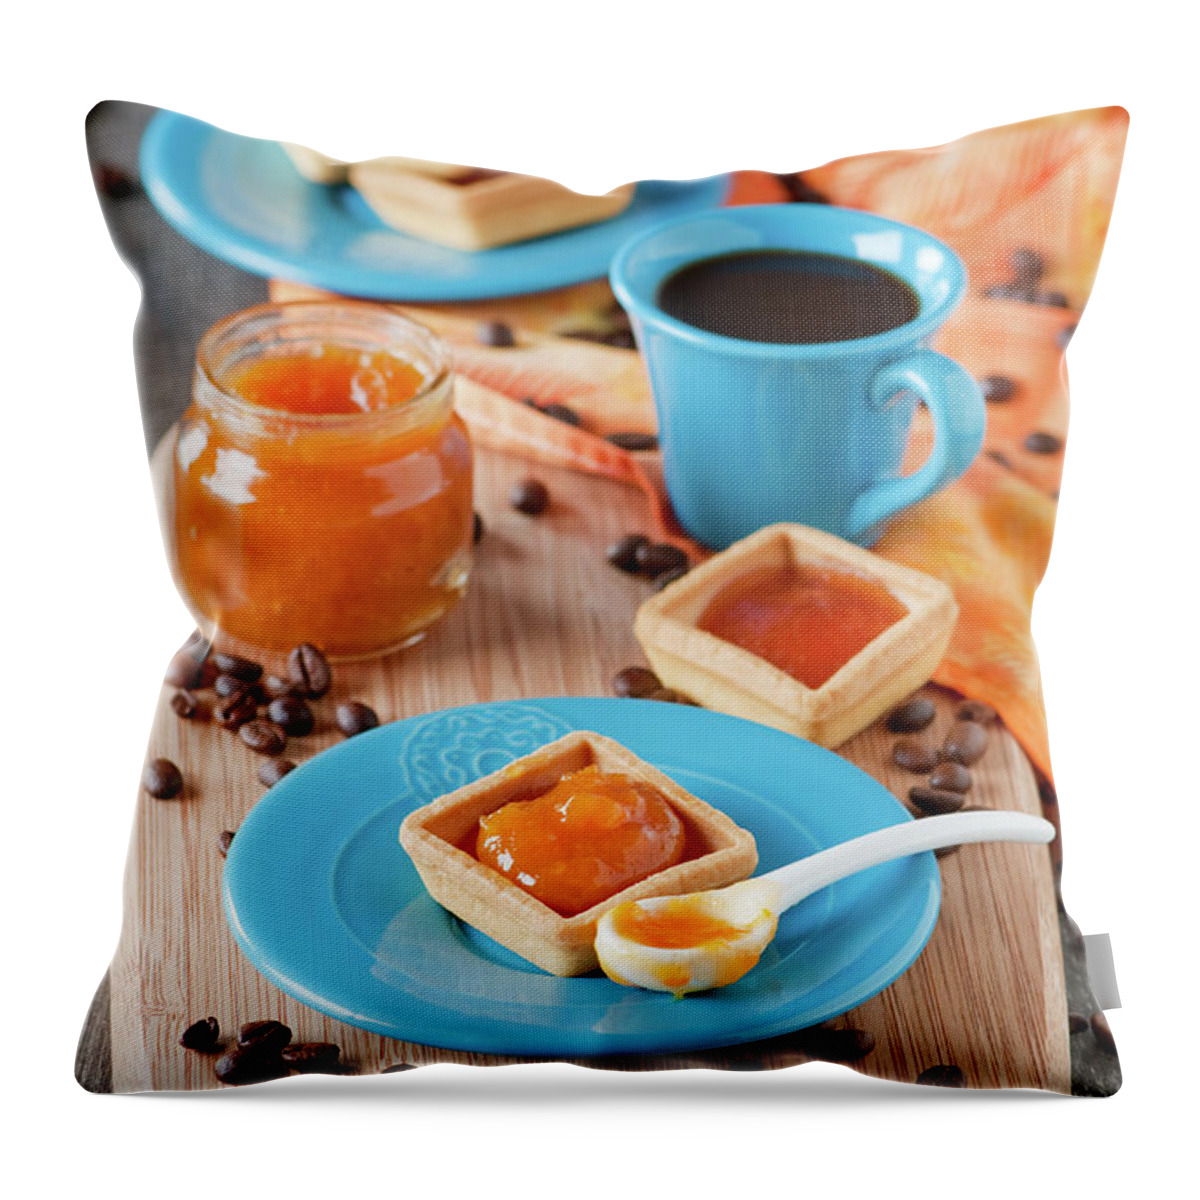 Spoon Throw Pillow featuring the photograph Cookies With Apricot Jam by Oxana Denezhkina